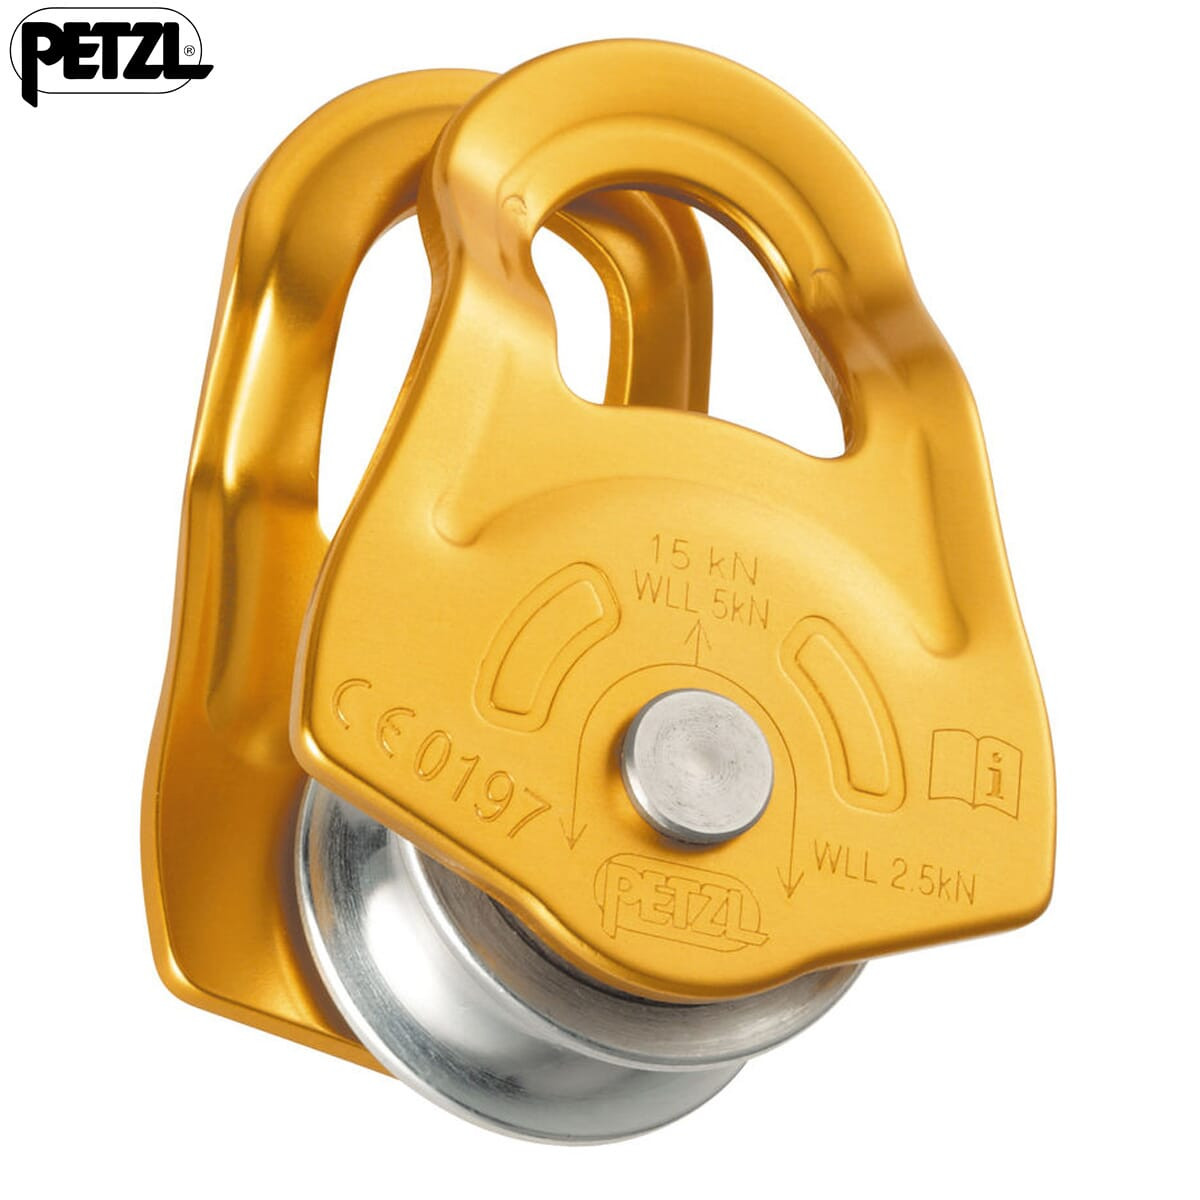 Petzl Mobile Pulley Versatile Ultra Compact and Lightweight